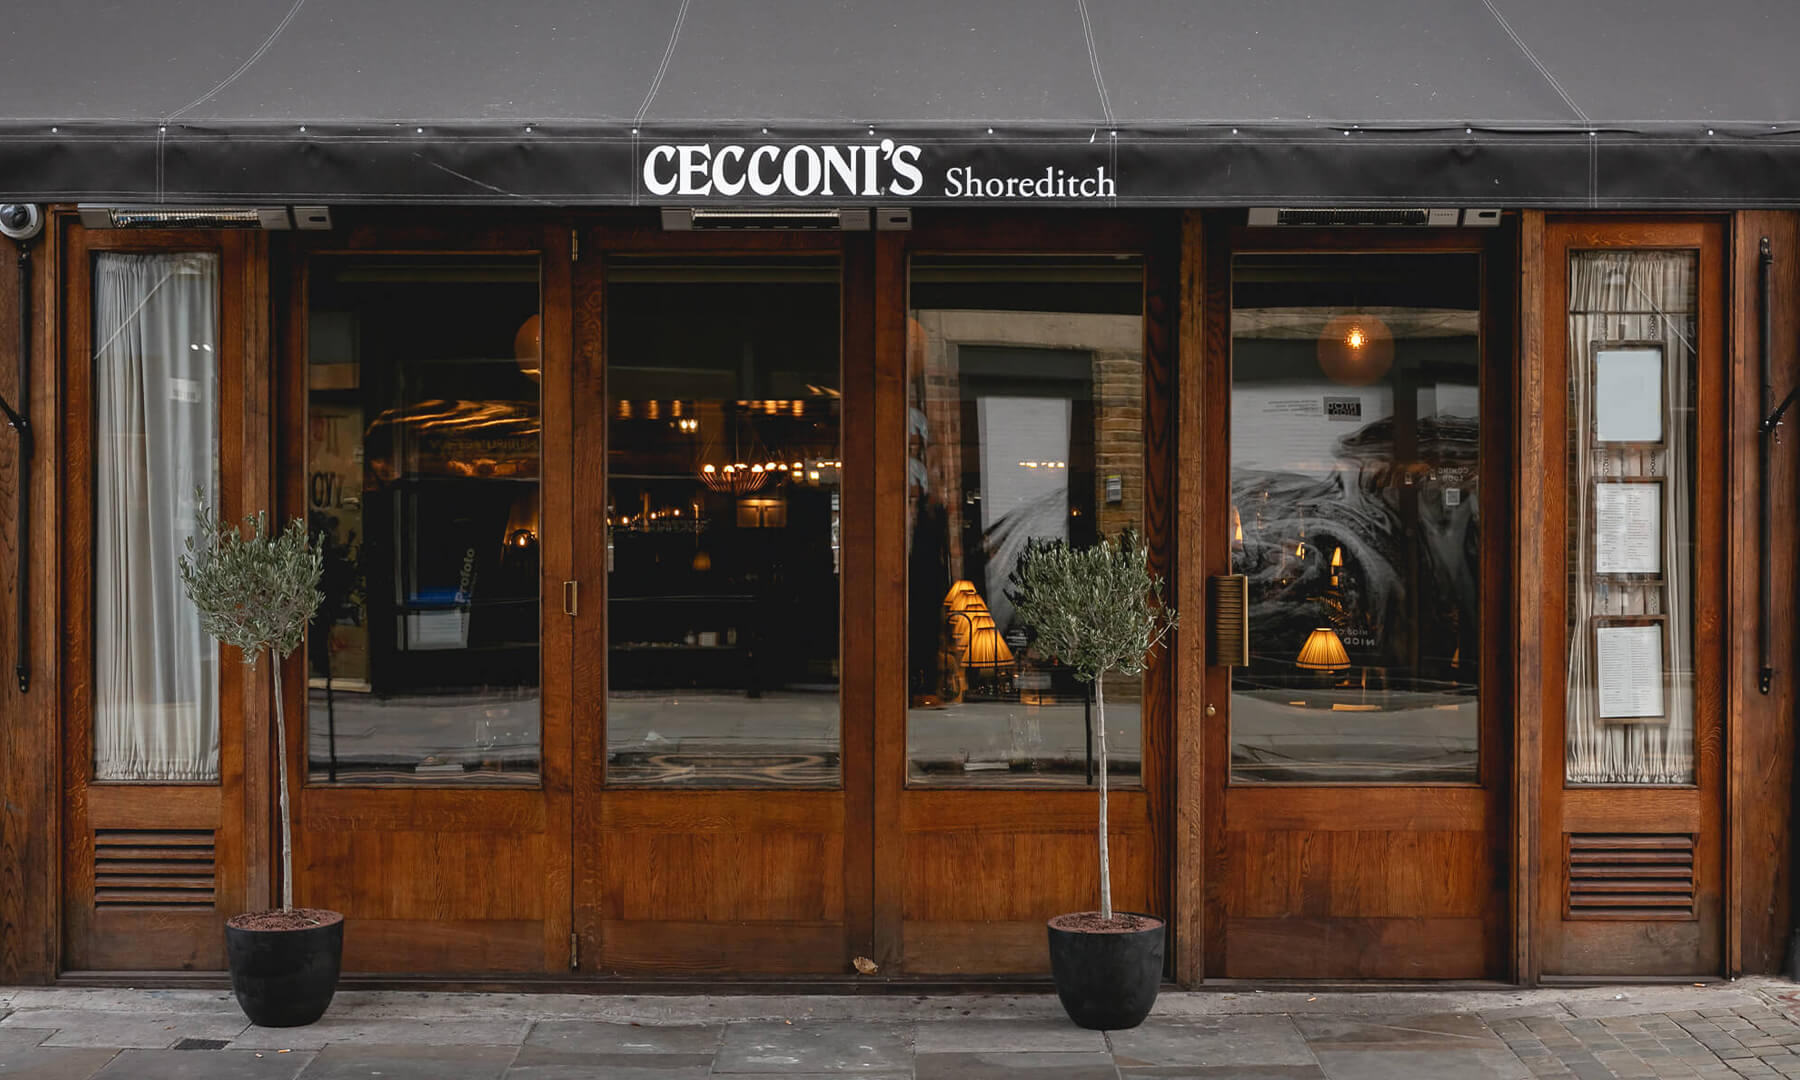 The exterior of Cecconi's Shoreditch, a restaurant with refined Italian dining in East London.